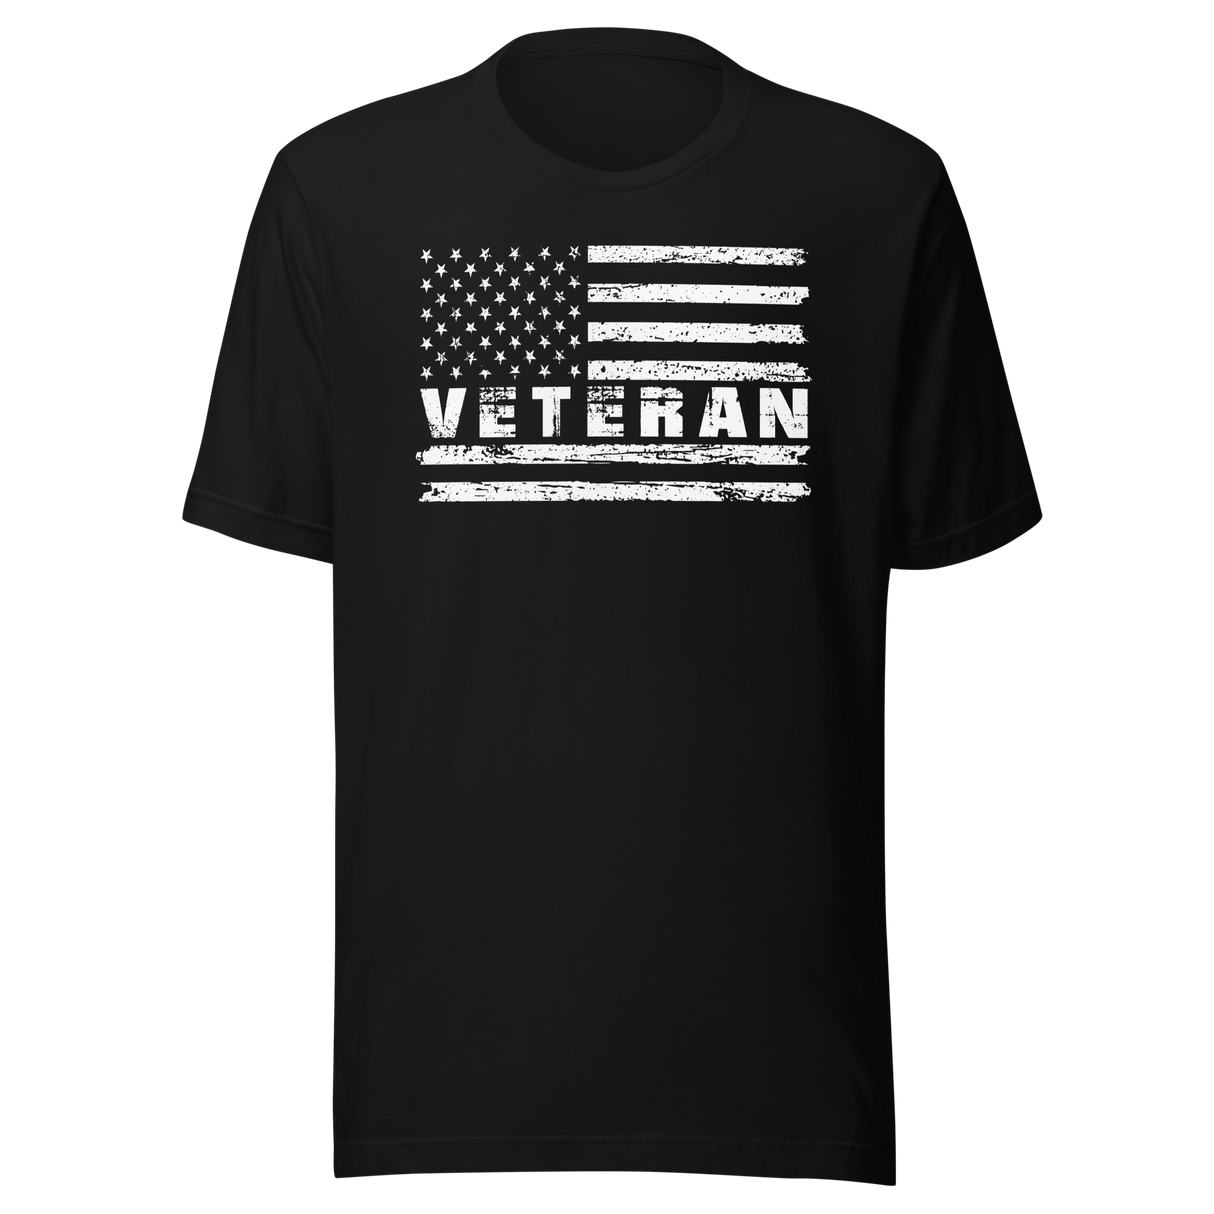 veteran-with-flag-veteran-tee-government-t-shirt-veteran-tee-patriotism-t-shirt-flag-tee#color_black